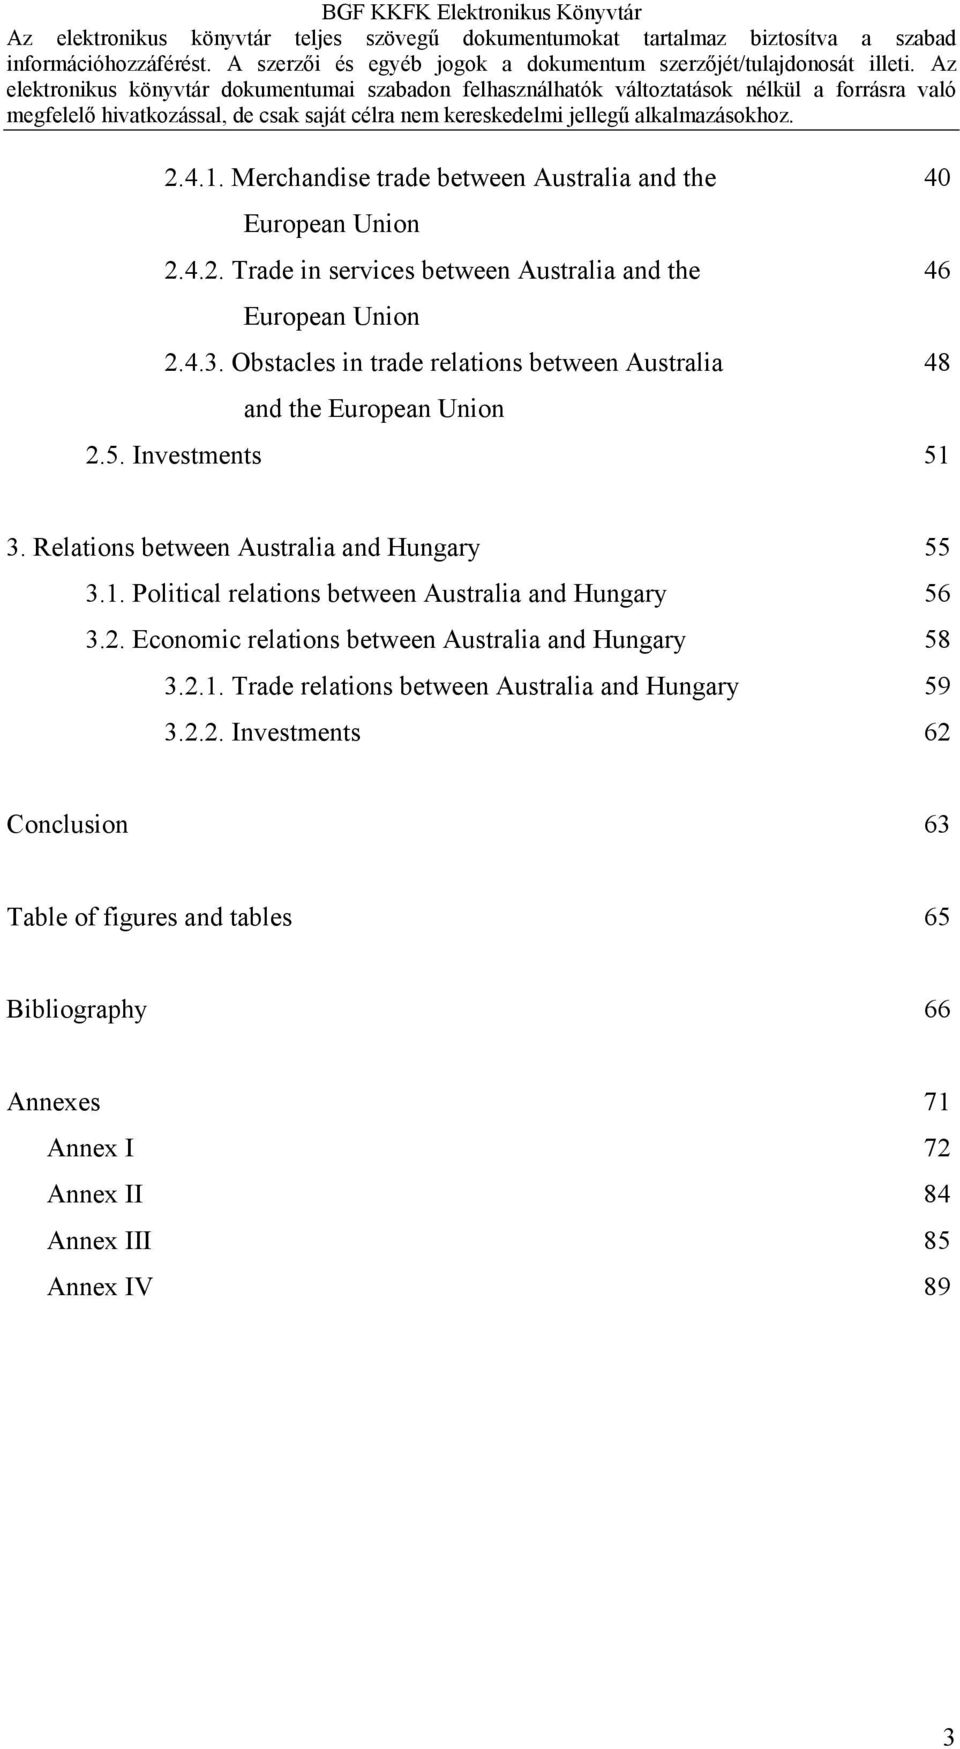 2. Economic relations between Australia and Hungary 58 3.2.1. Trade relations between Australia and Hungary 59 3.2.2. Investments 62 Conclusion 63 Table of figures and tables 65 Bibliography 66 Annexes 71 Annex I 72 Annex II 84 Annex III 85 Annex IV 89 3